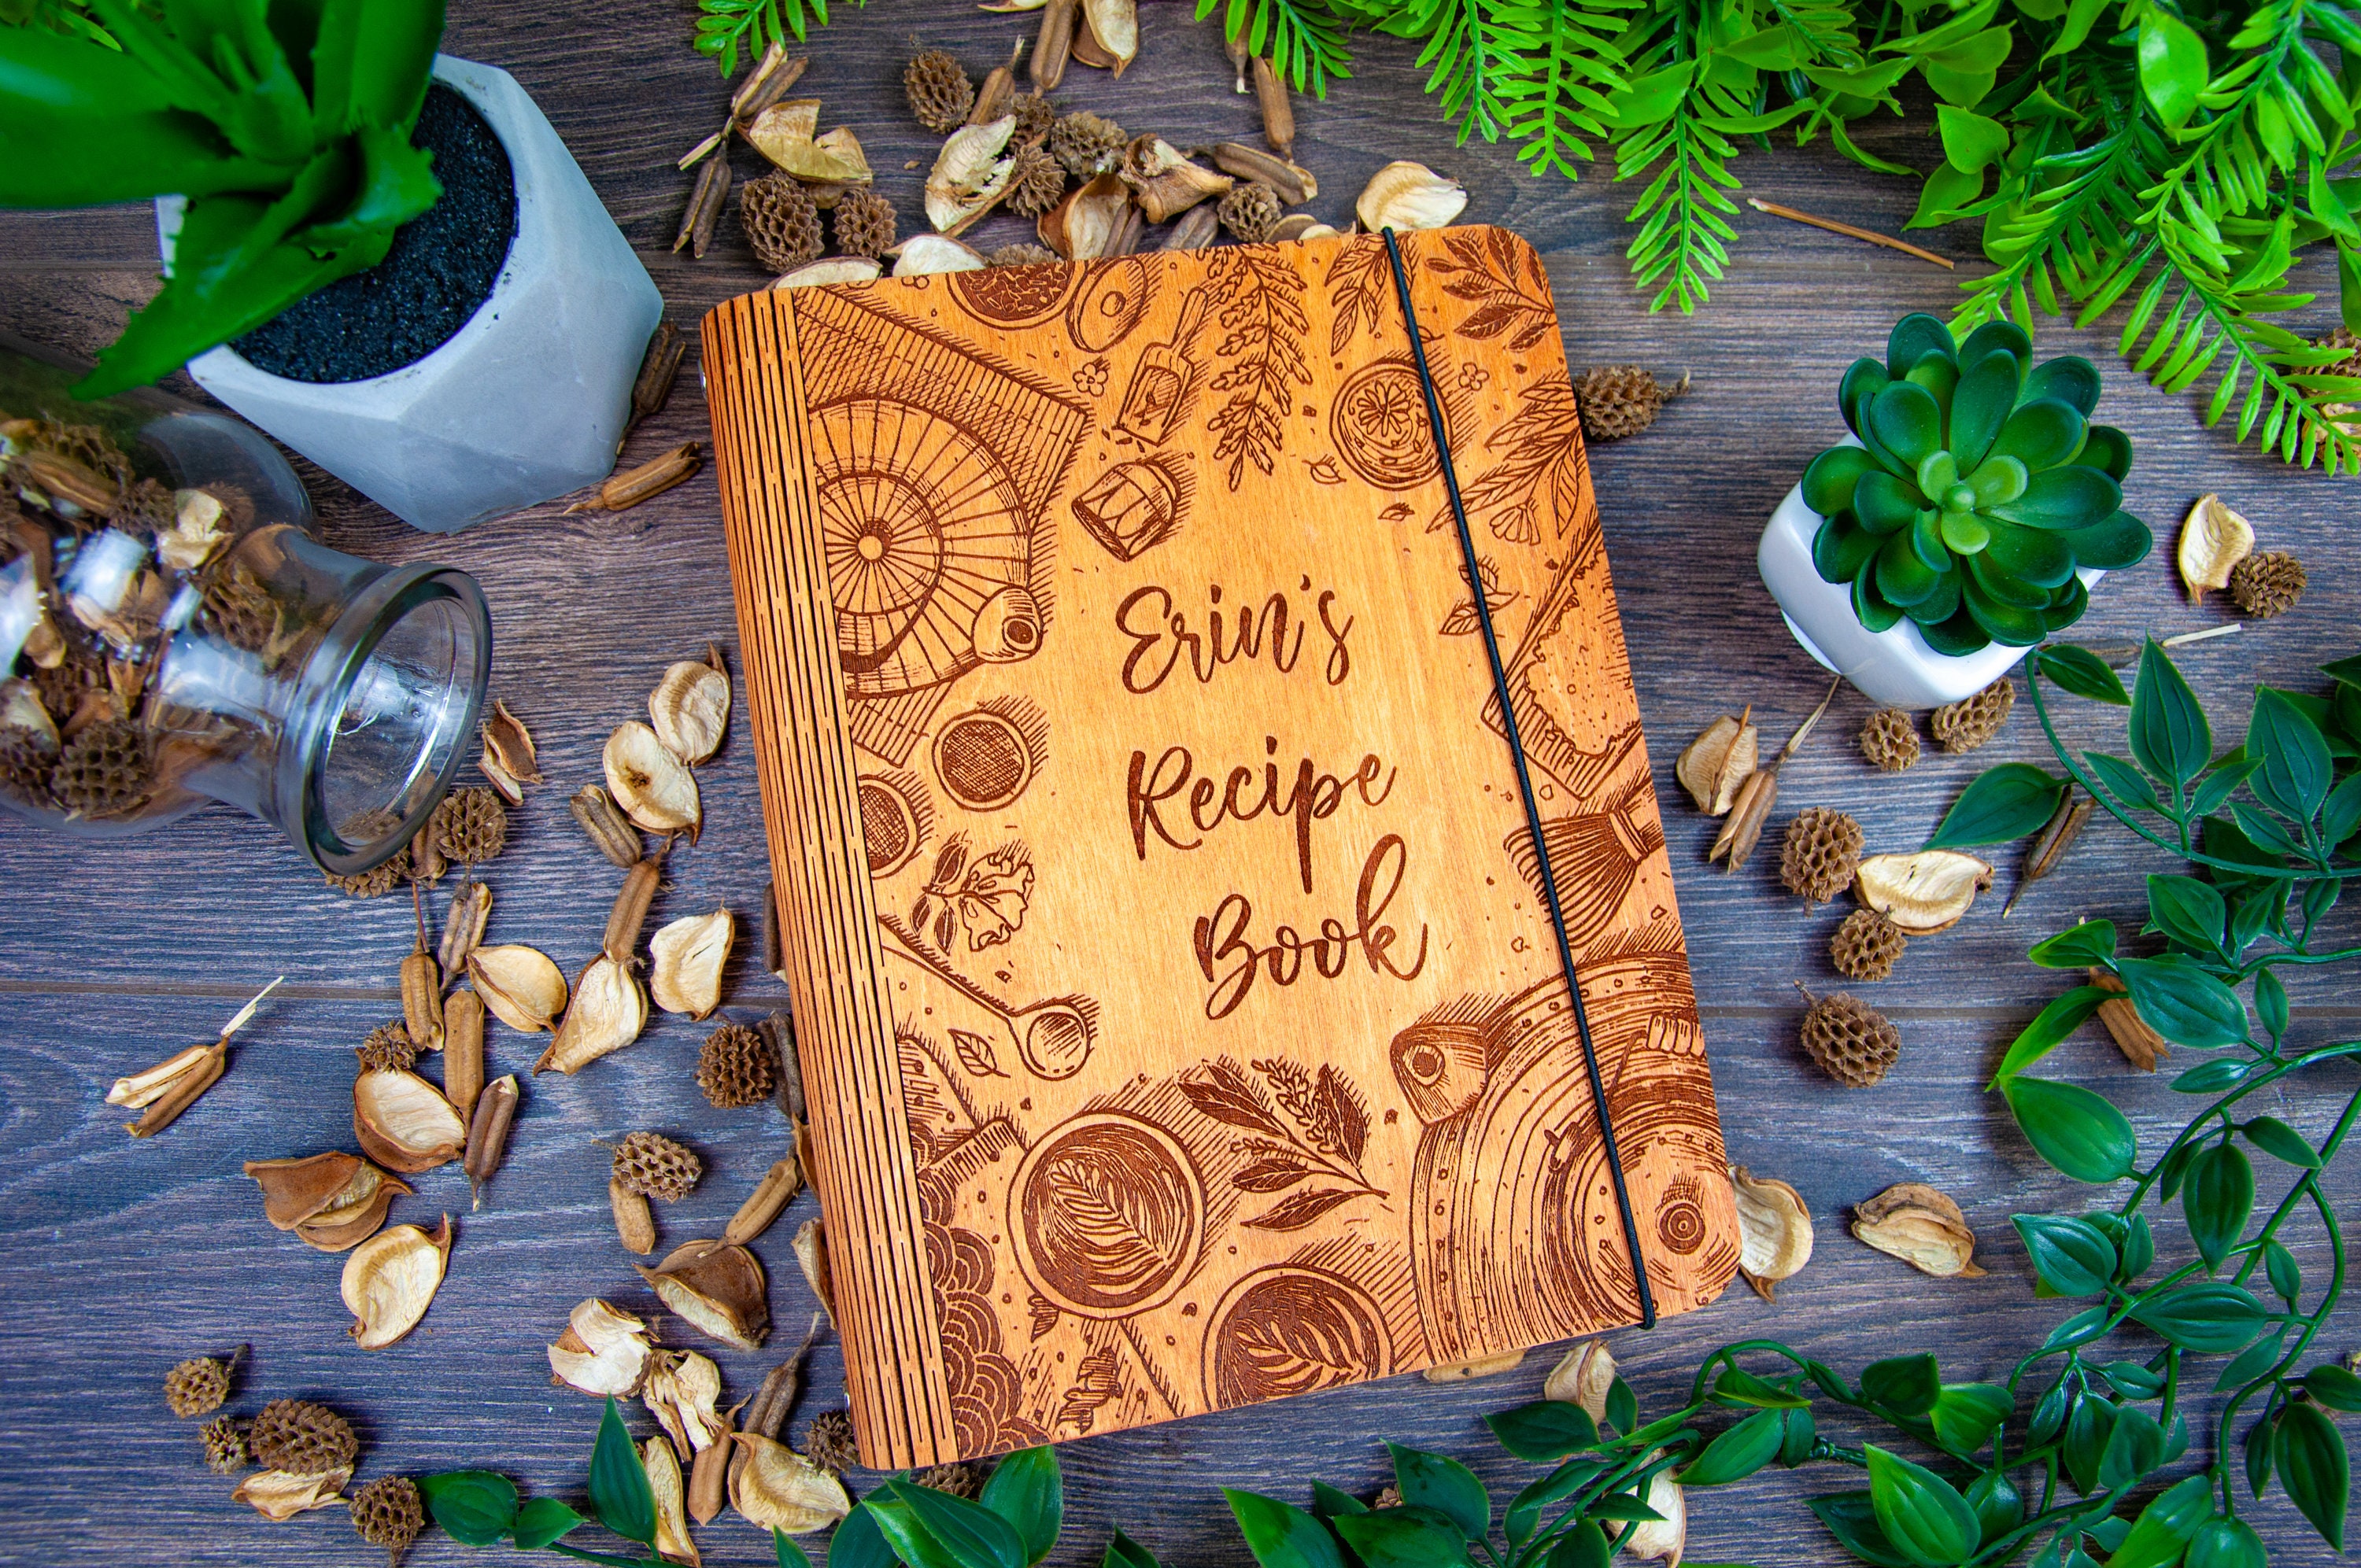 ENJOY THE WOOD Wooden Blank Recipe Book Binder - Personalized Recipe  Notebook - Family Cookbook Journal Custom Sketchbook To Write In Organizer  by